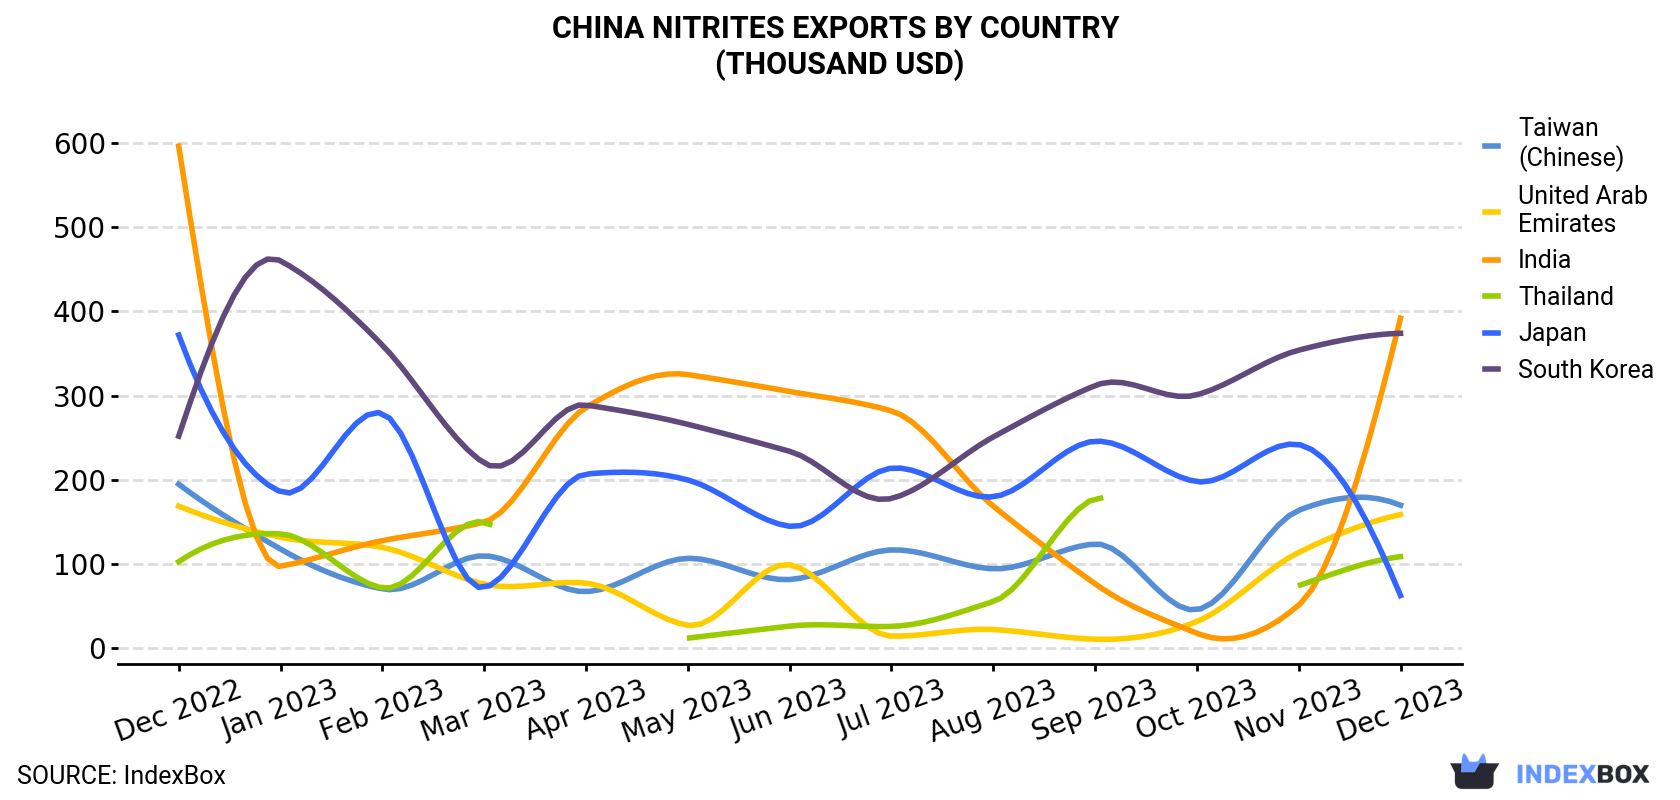 China Nitrites Exports By Country (Thousand USD)